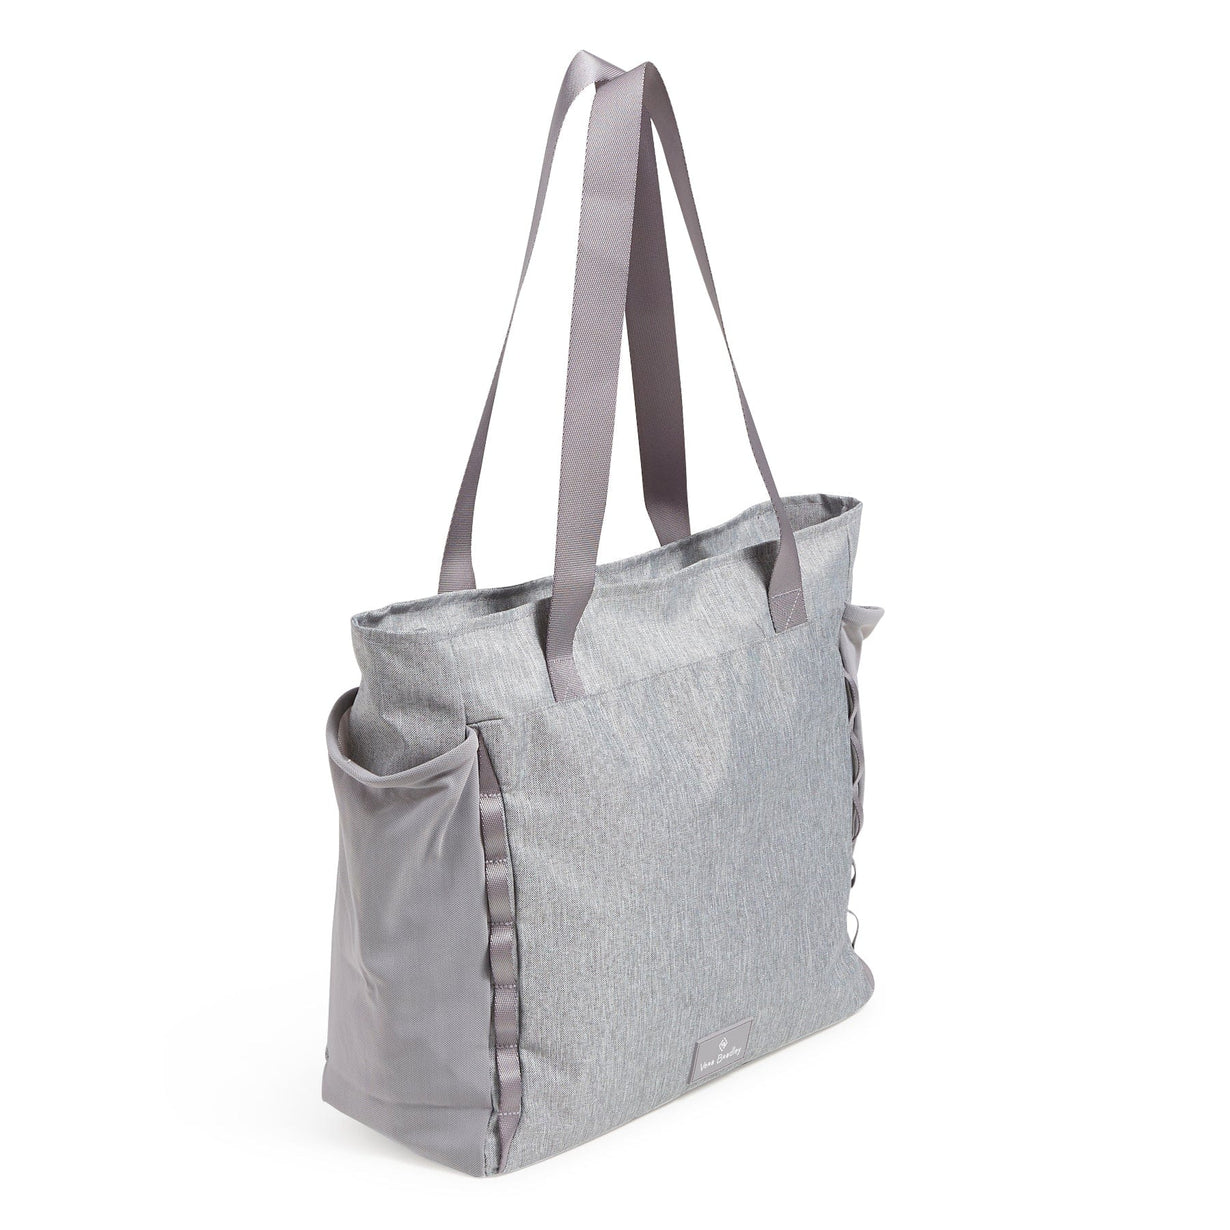 Outlet Sport Tote Bag - Medium Heather Gray